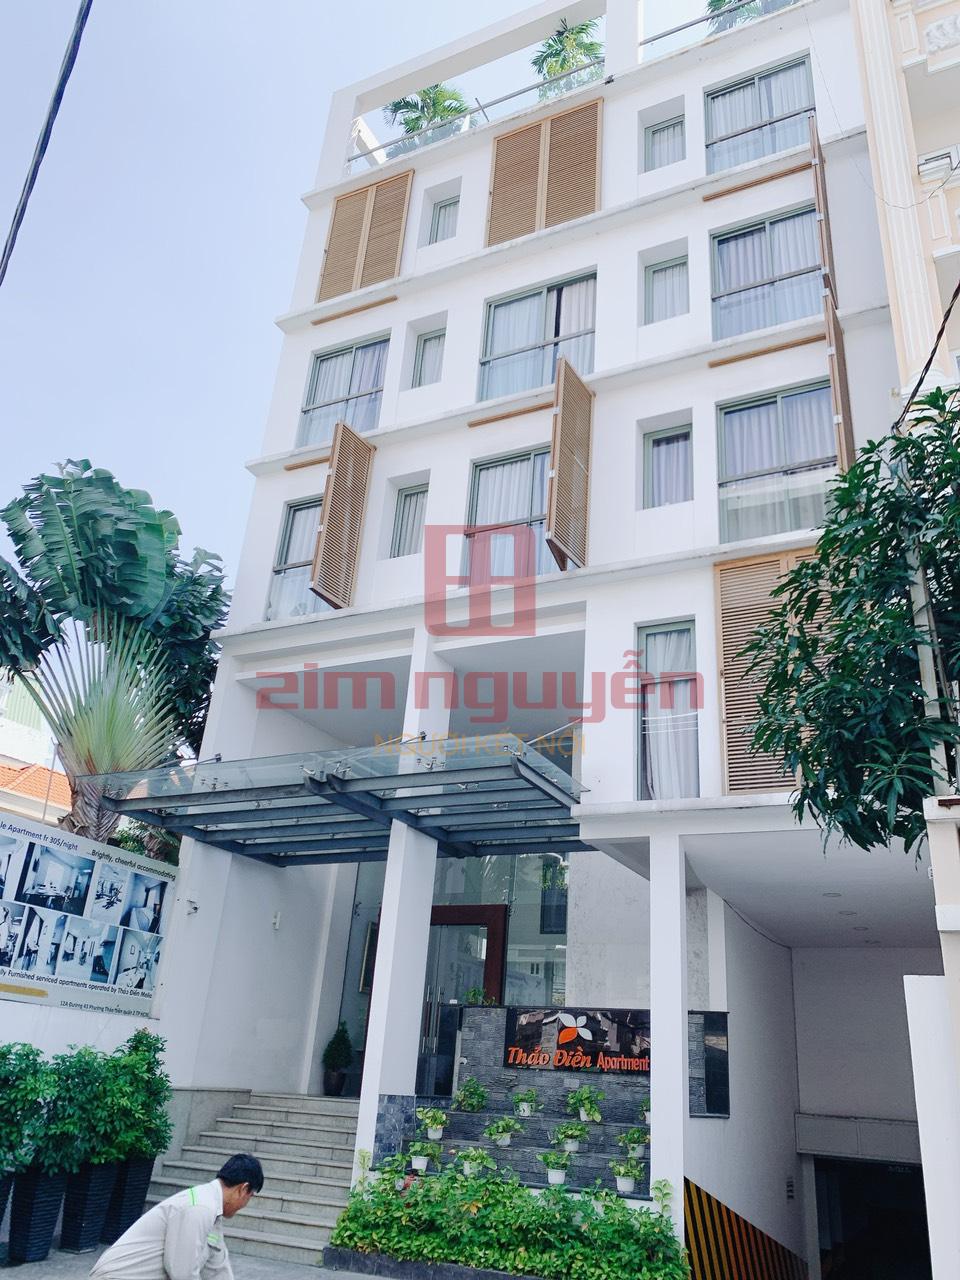 Serviced apartment building for sale, Street 43, Thao Dien Ward, Area 257.4m